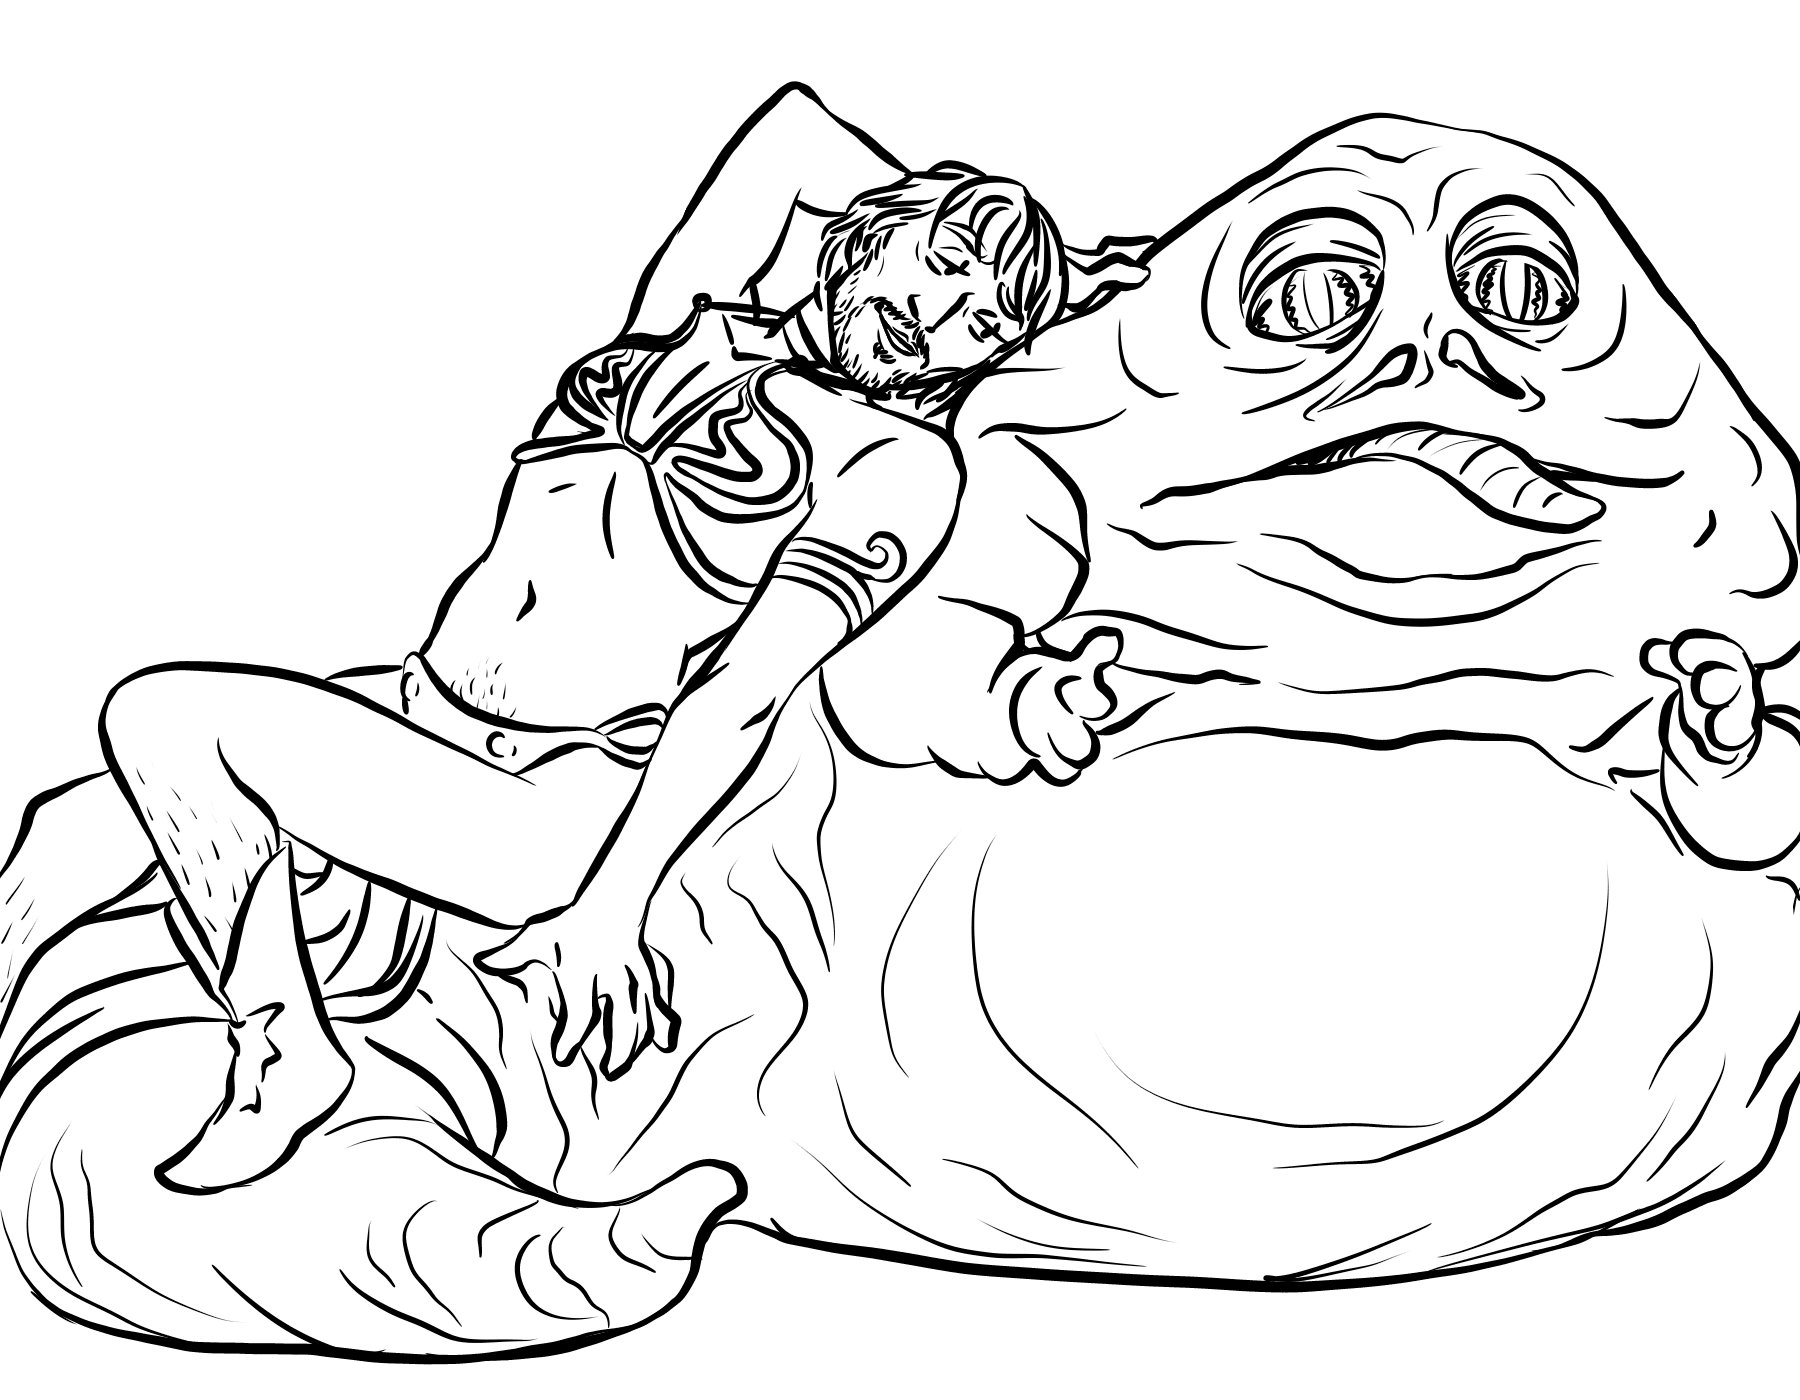 Jabba The Hutt Drawing At Getdrawings Free Download Sketch Coloring Page.